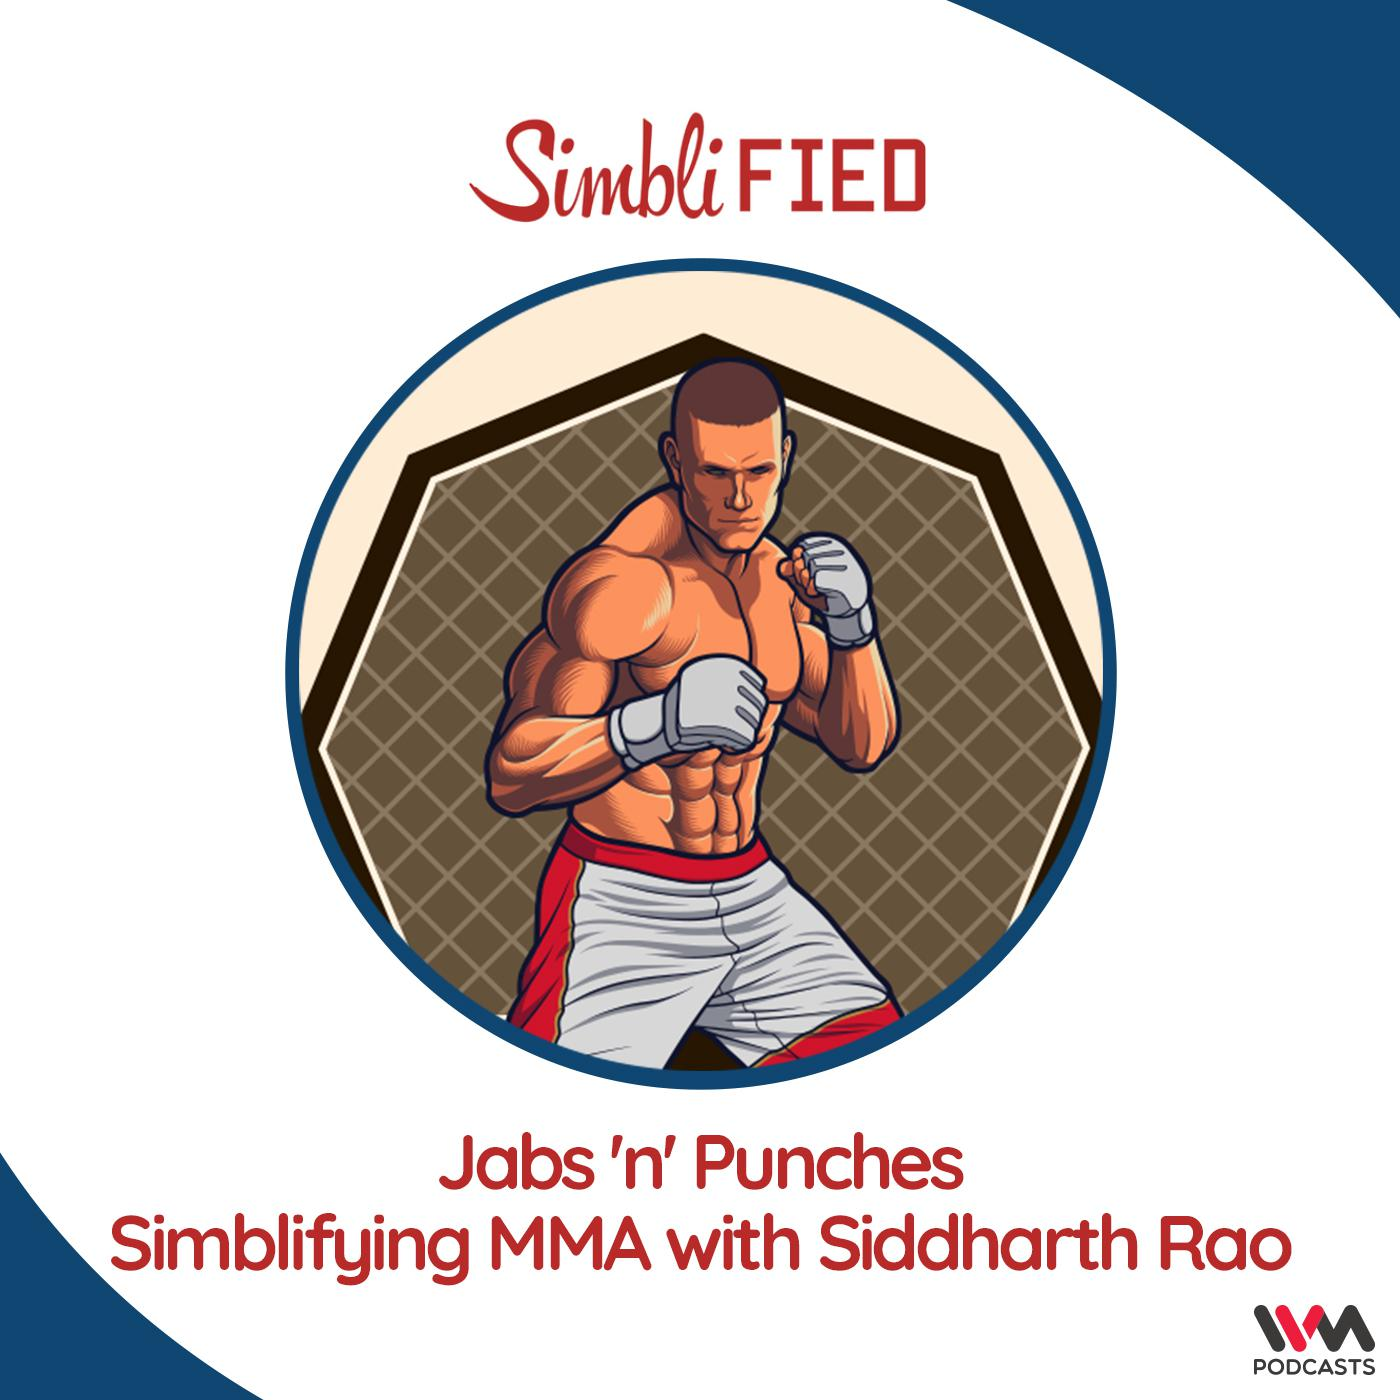 Jabs 'n' Punches: Simblifying MMA with Siddharth Rao